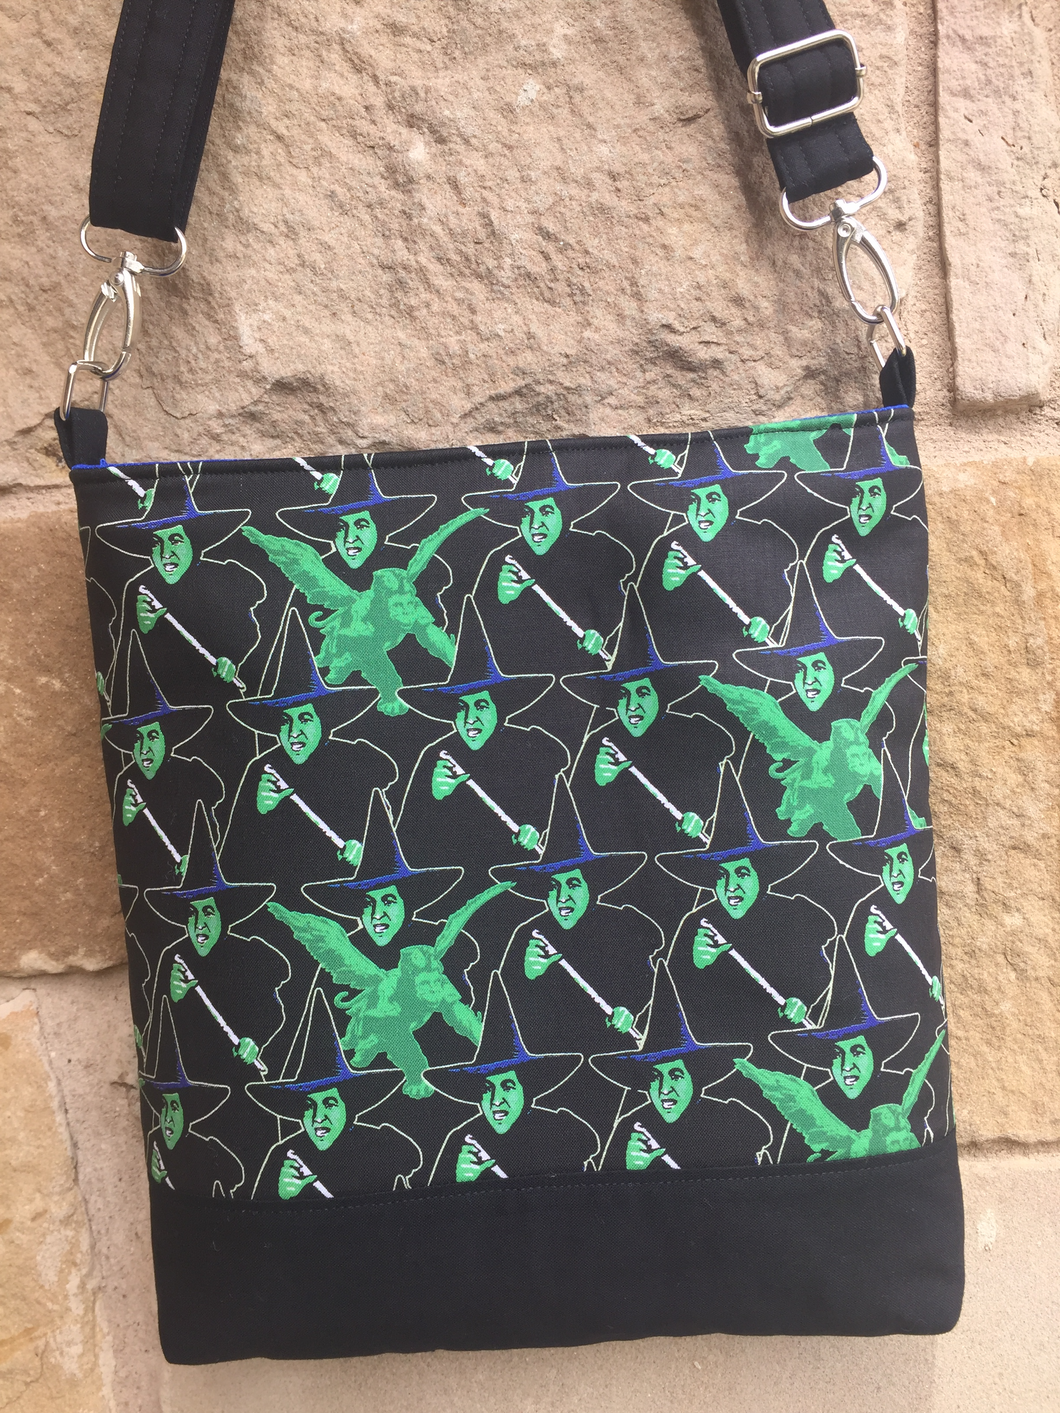 Messenger Bag Made With Licensed A Witch And Her Monkeys Fabric - Adjustable Strap - Zippered Closure - Zippered Pocket - Cross Body Bag